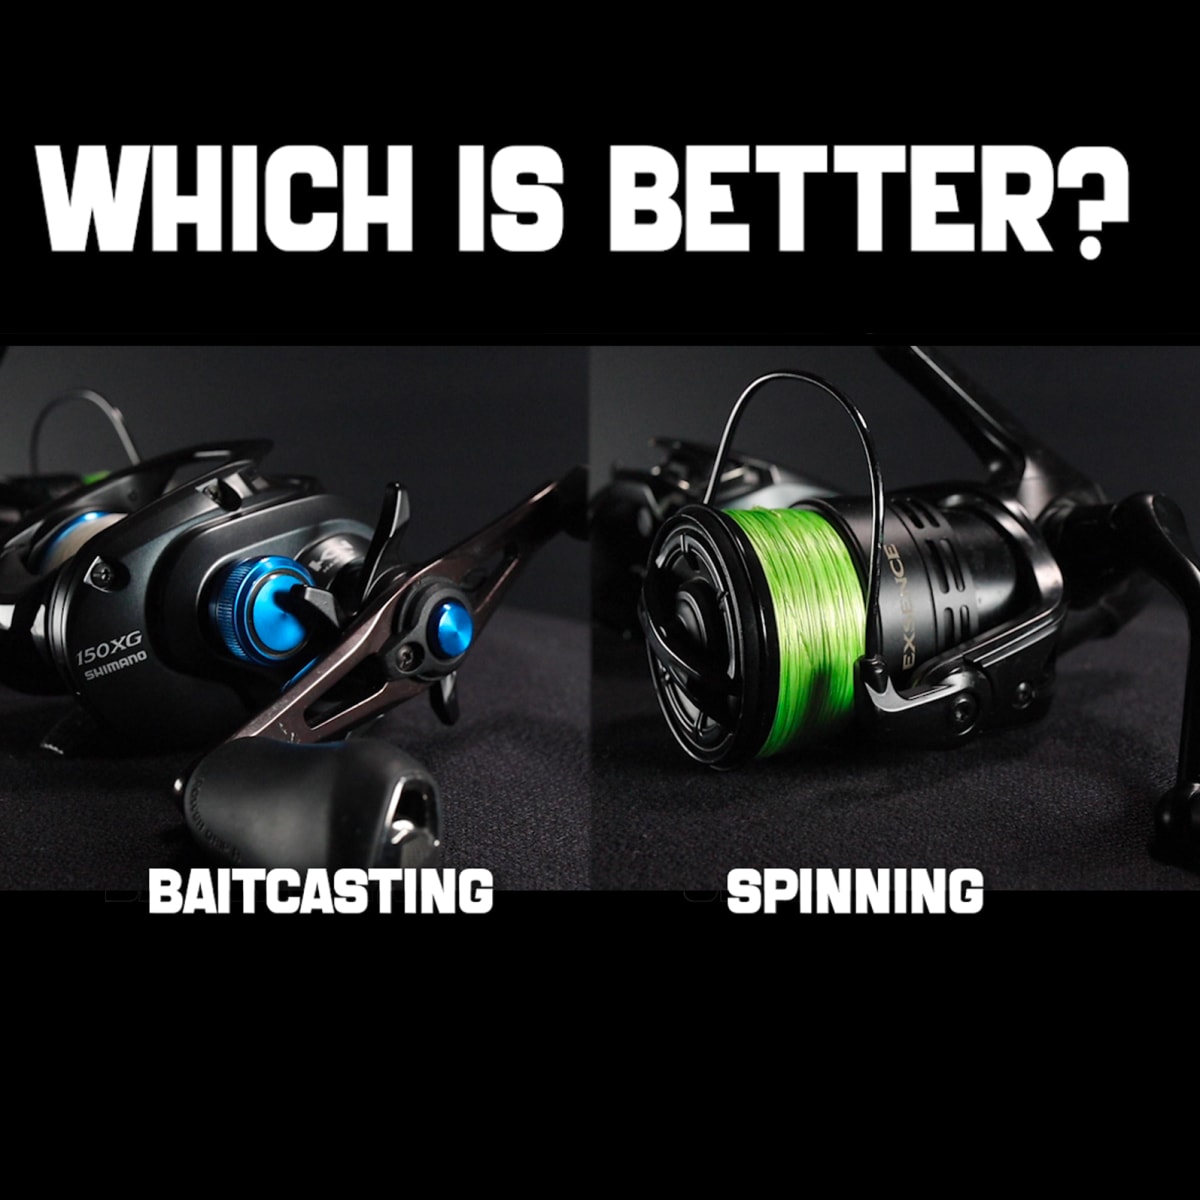 How To Spool Fishing Line On Reels (Spinning & Baitcasting